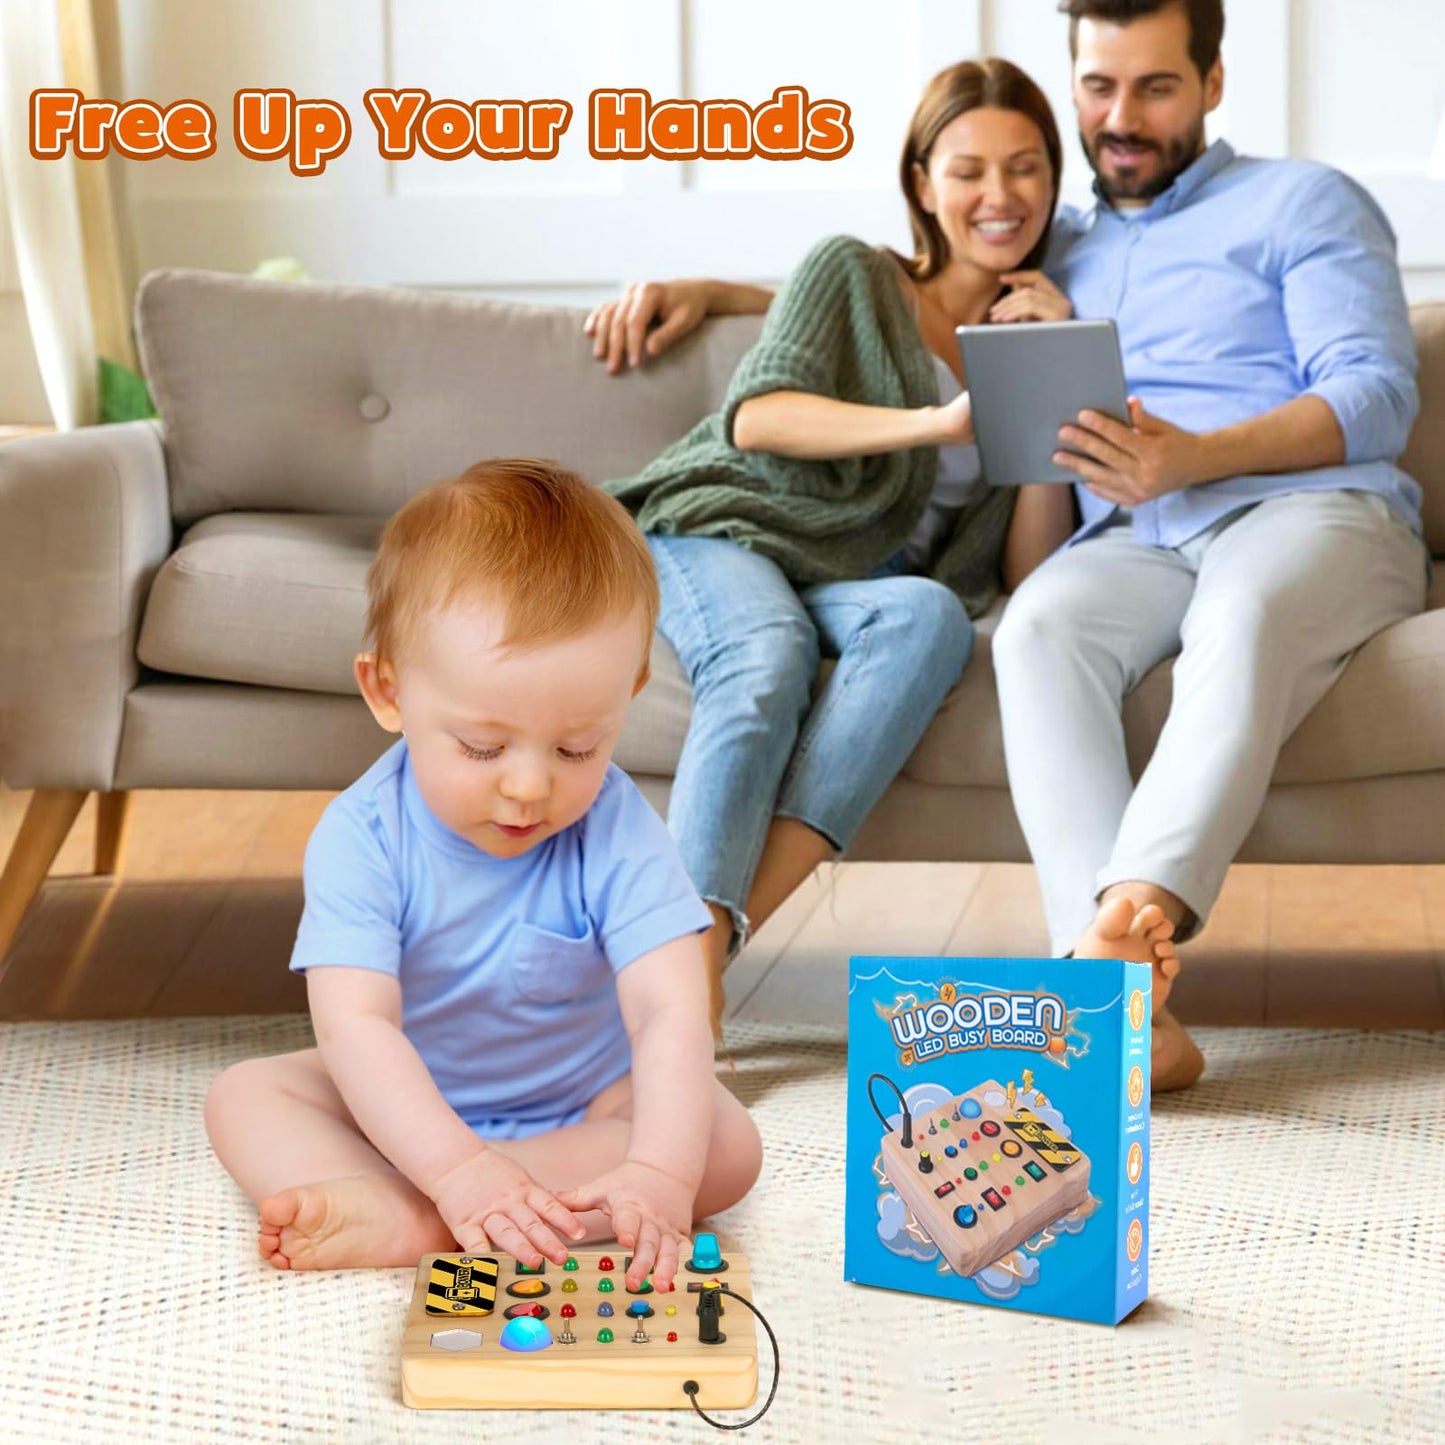 TINTECUSA Busy Board Montessori Toys for Toddler, Wooden Sensory Board Switch Toy with Shape Sorter LED Light Up Toys Educational Plane Travel Activity for 1-6 Year Old Girls & Boys Gifts